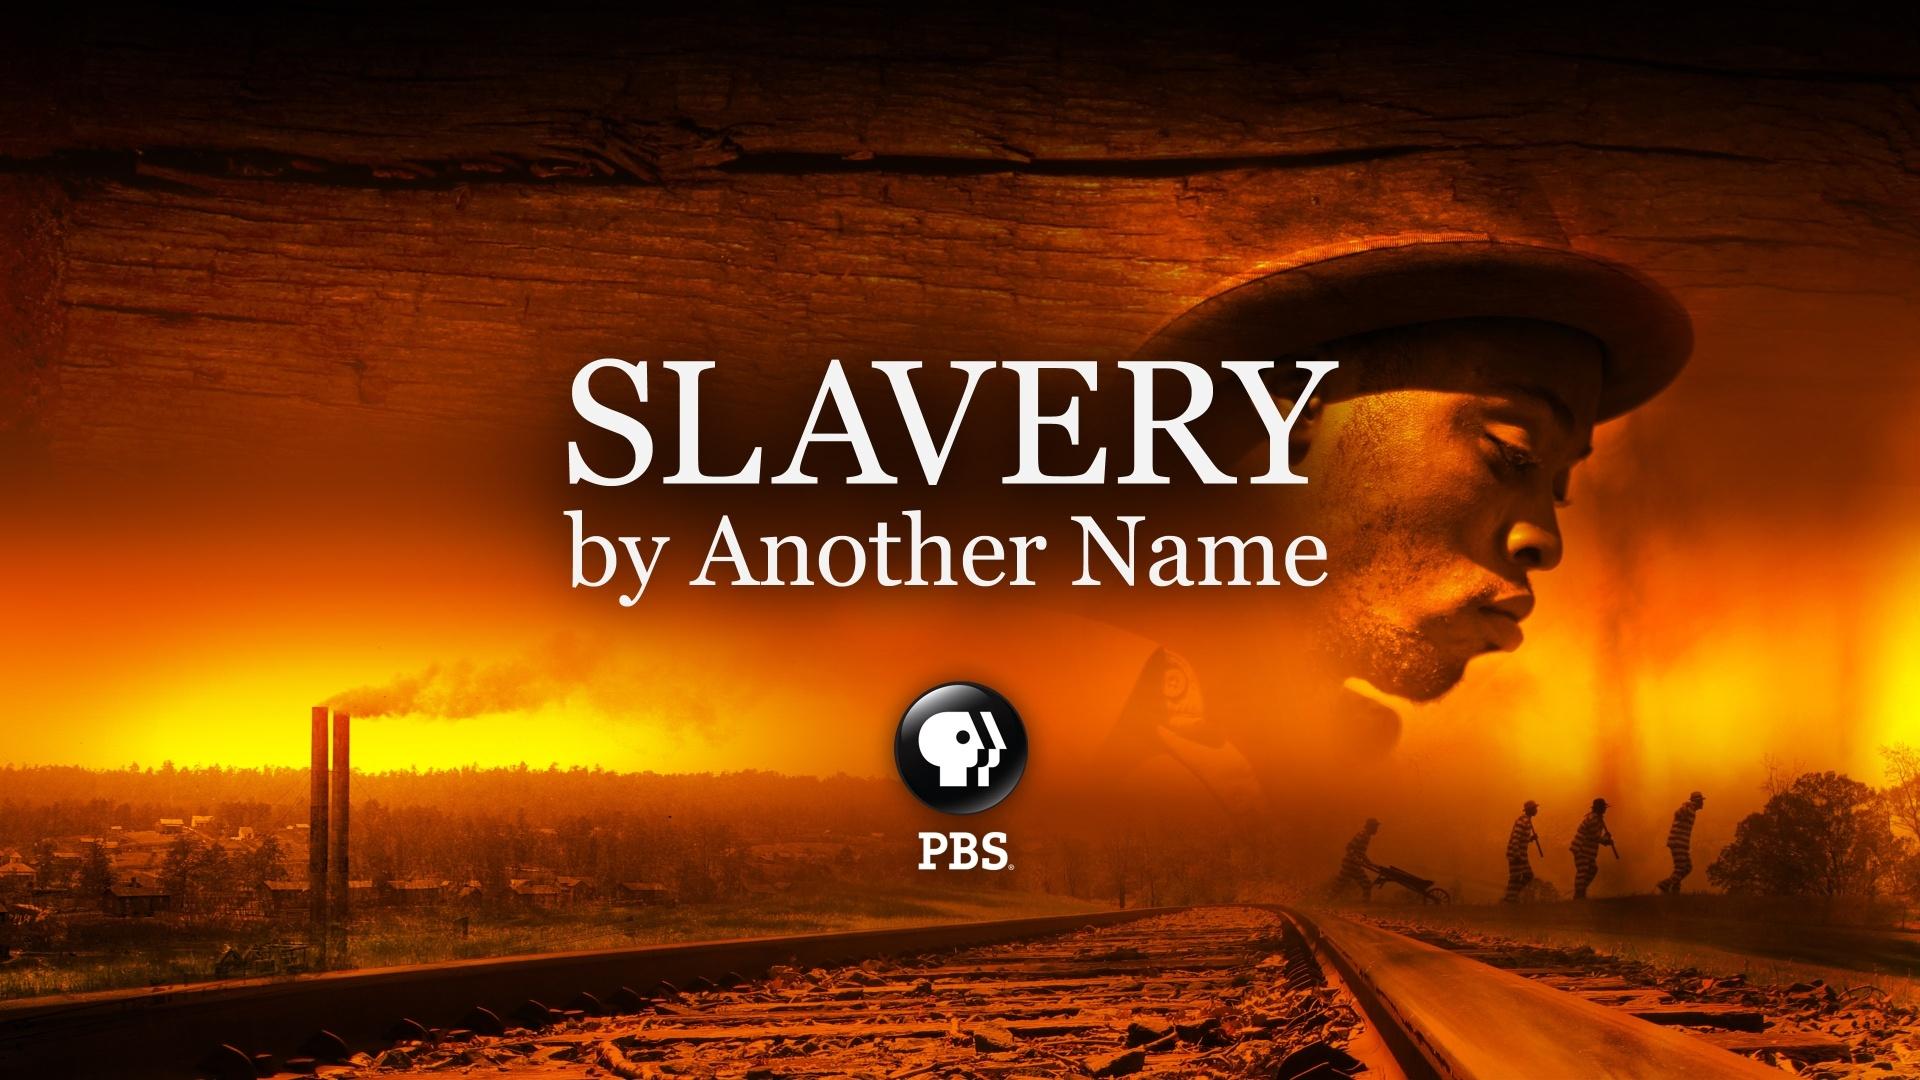 Slavery by Another Name PBS